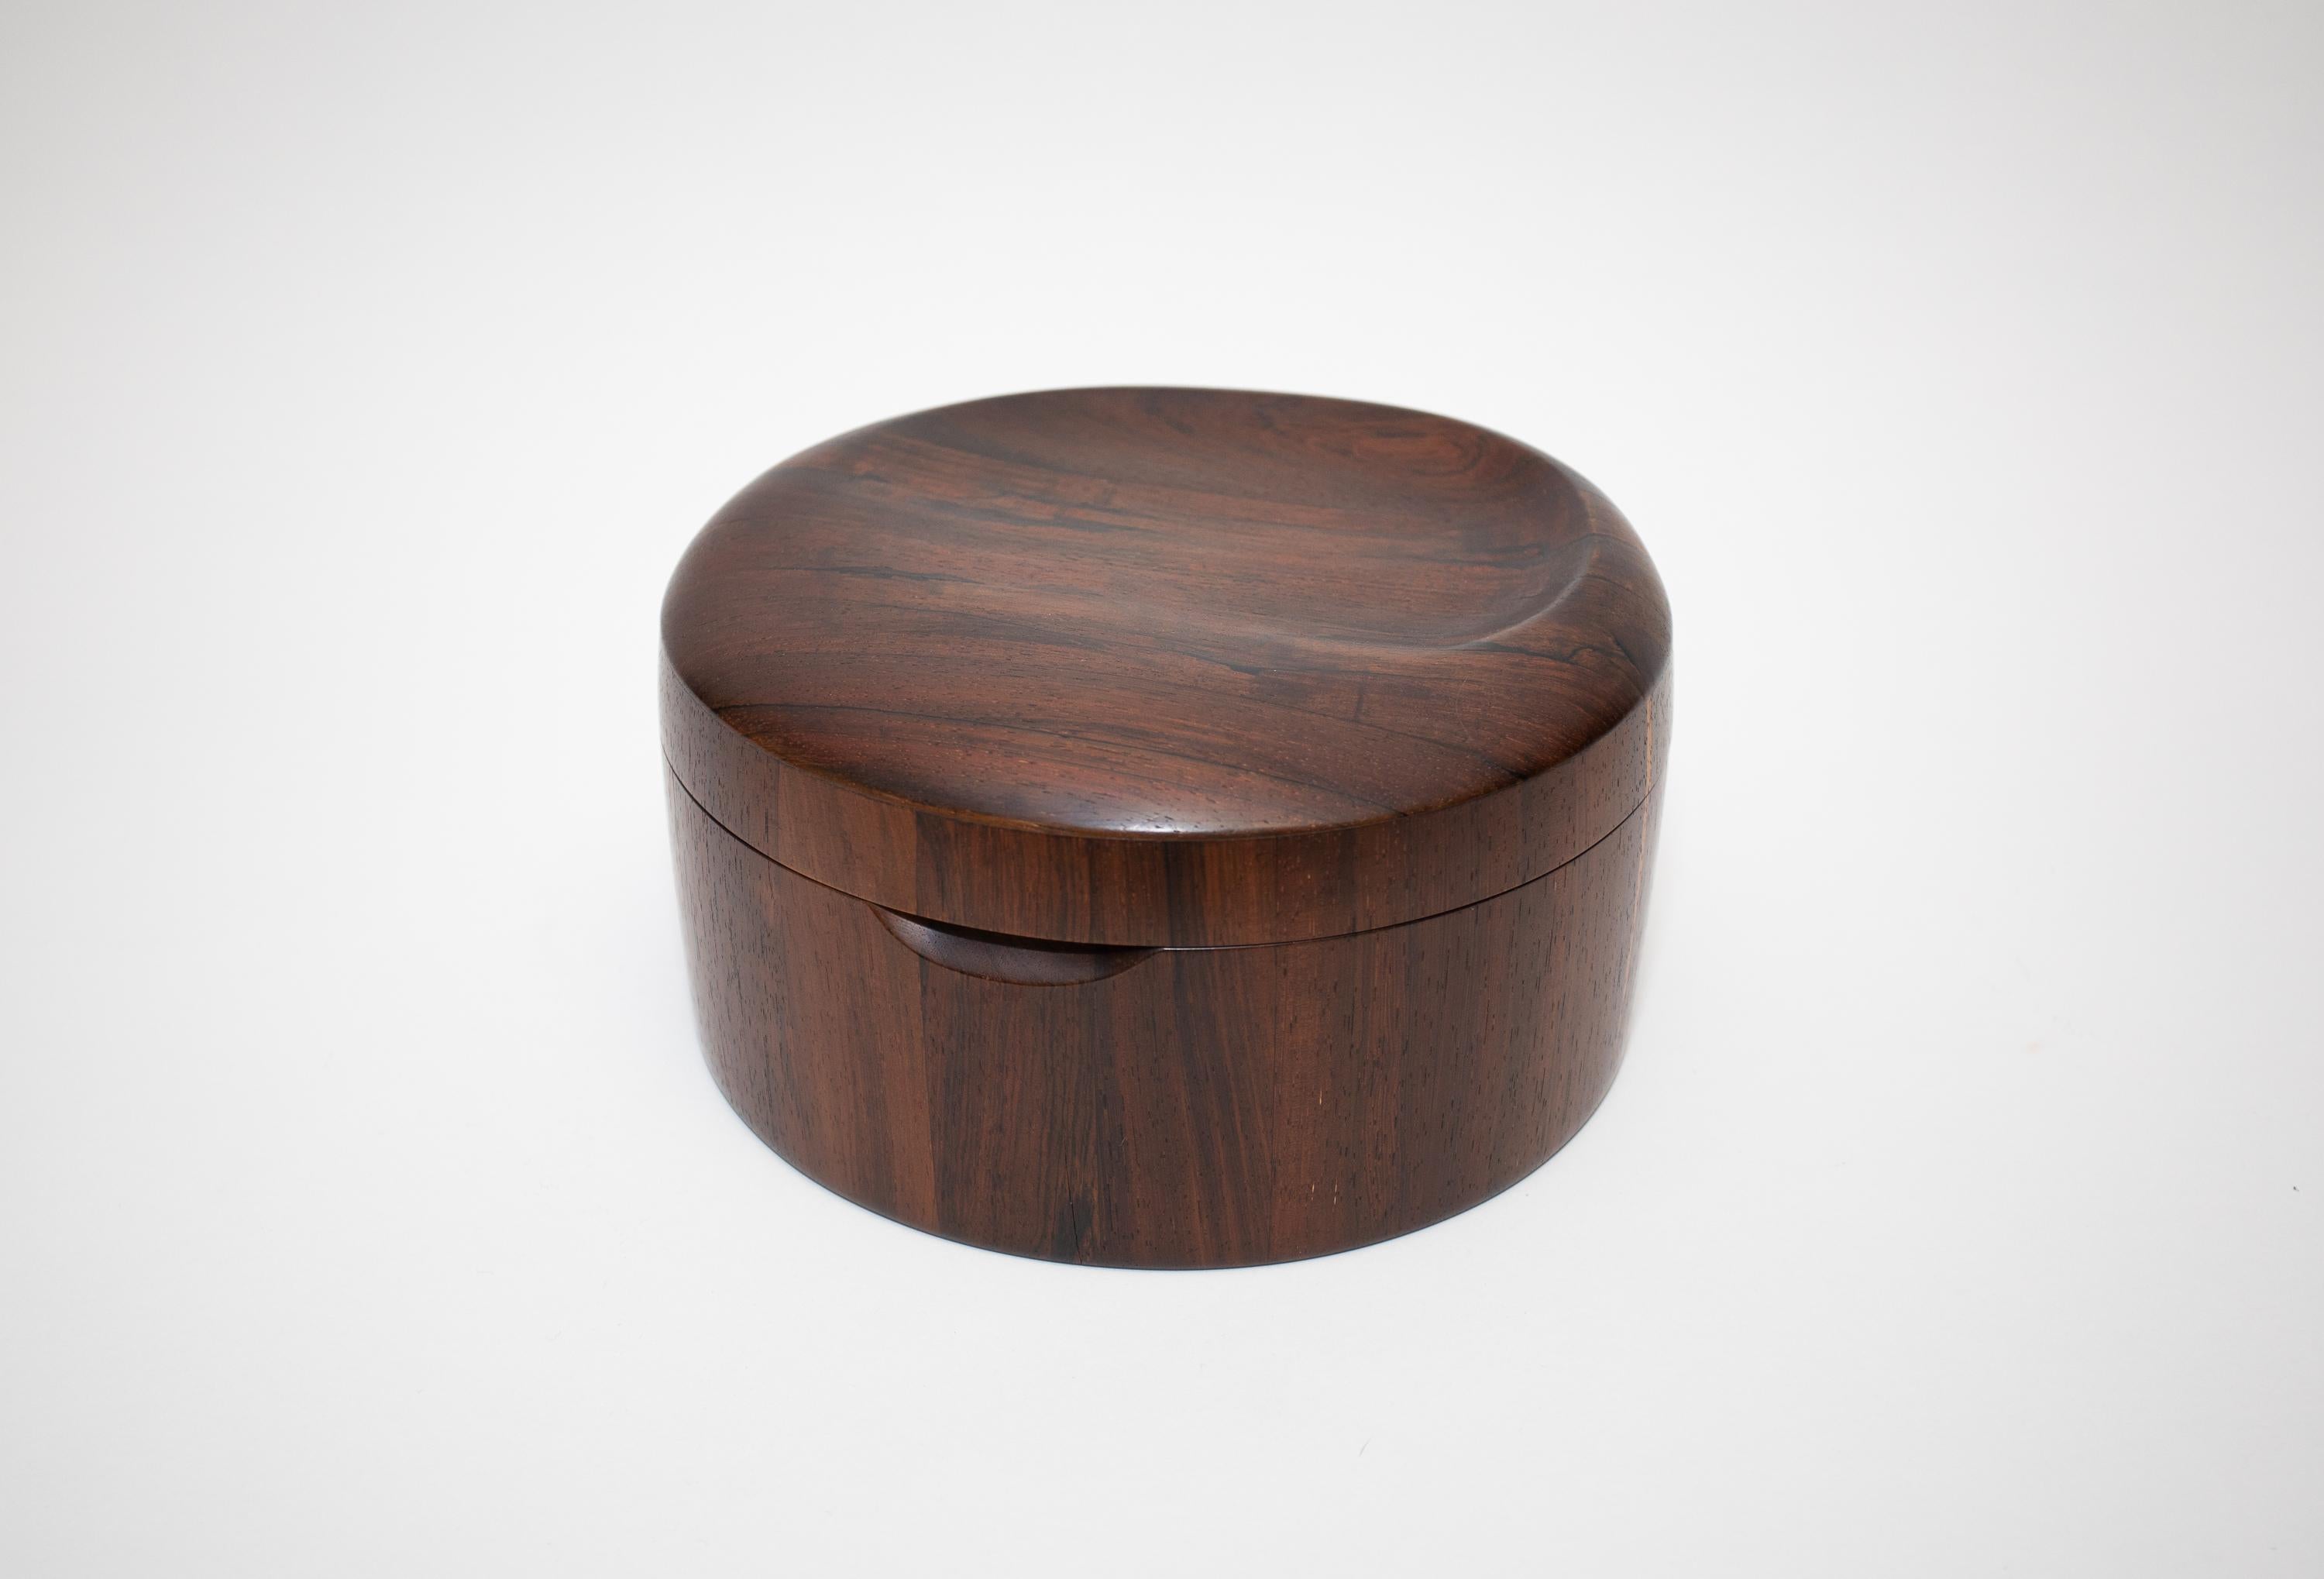 A Dark Rosewoo box with an integrated hand carved Tray.
Great wood grain and Organic Form. 
 